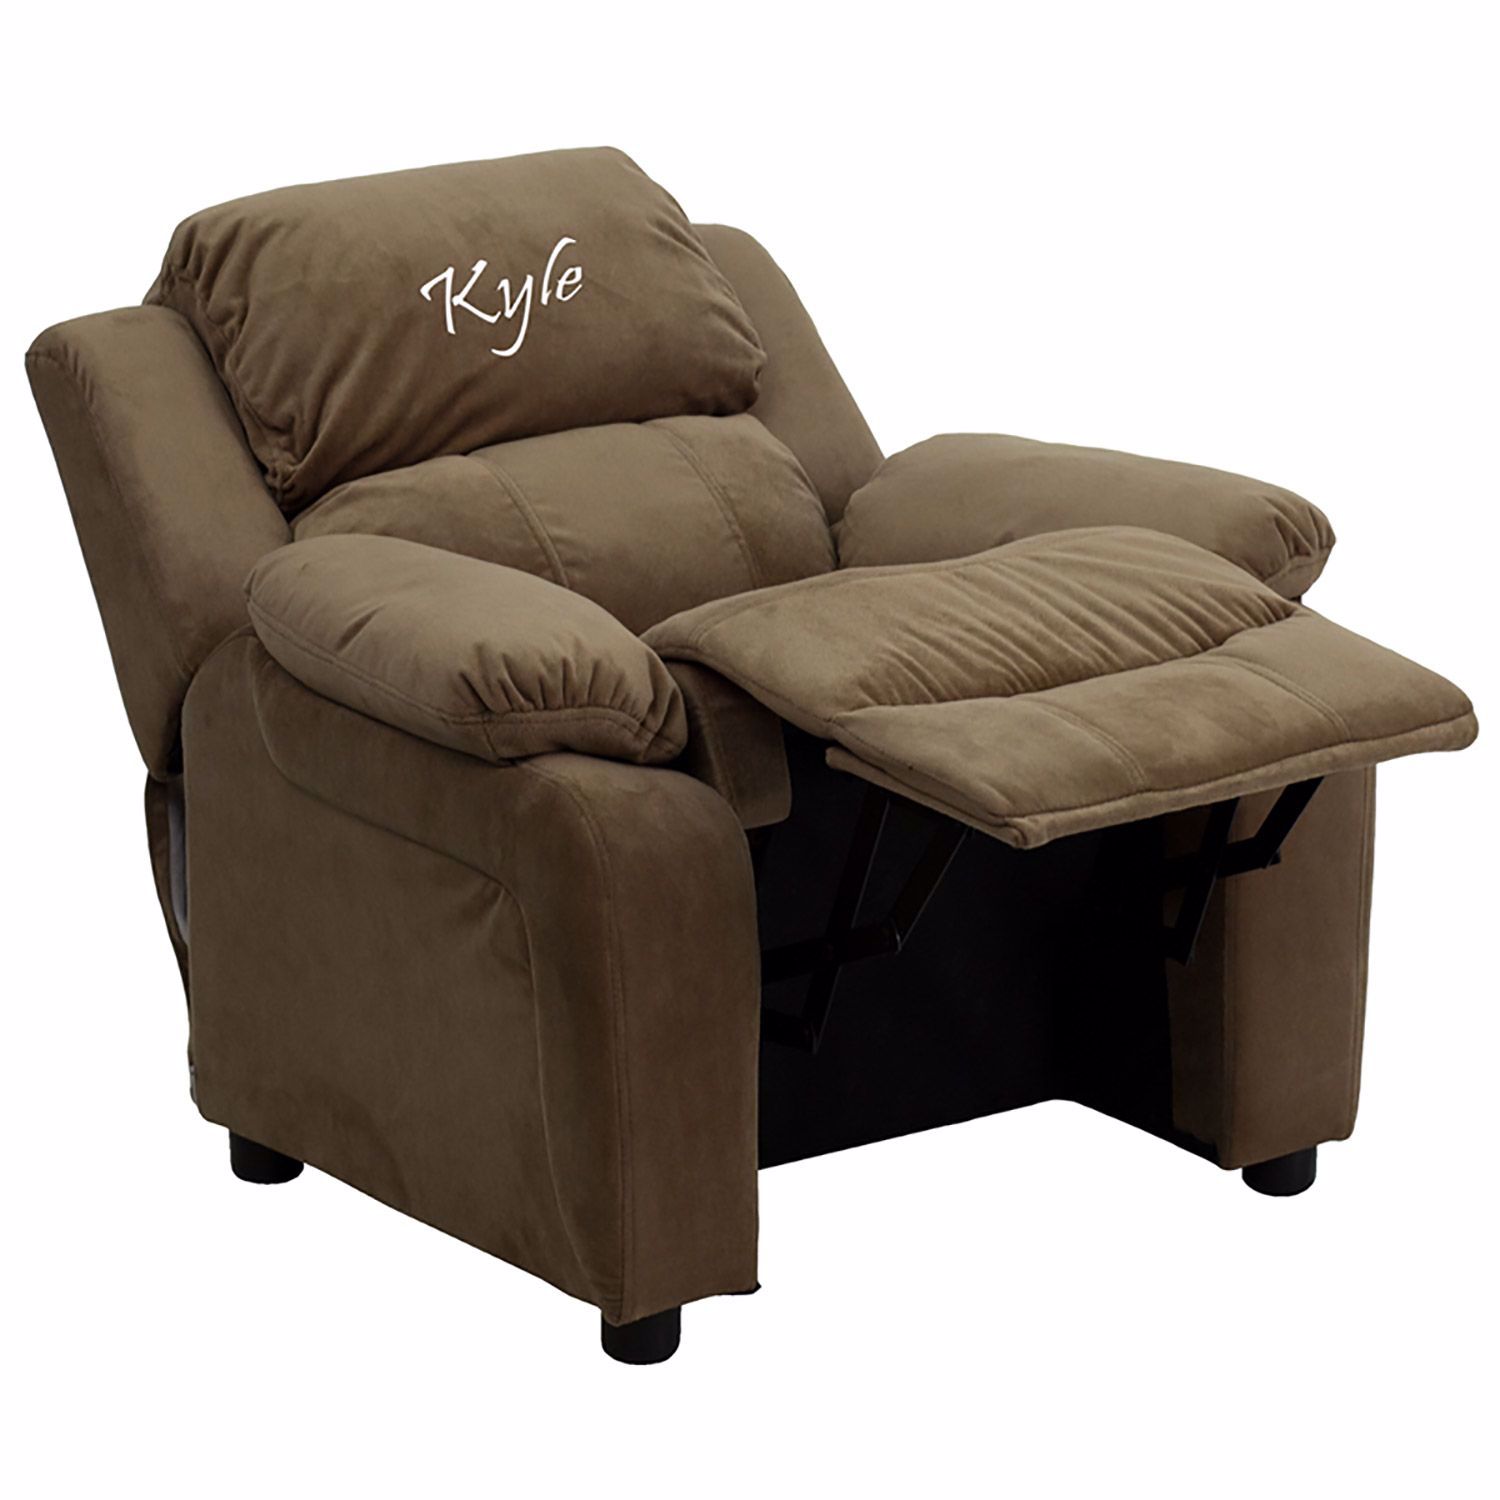 personalized recliners for toddlers